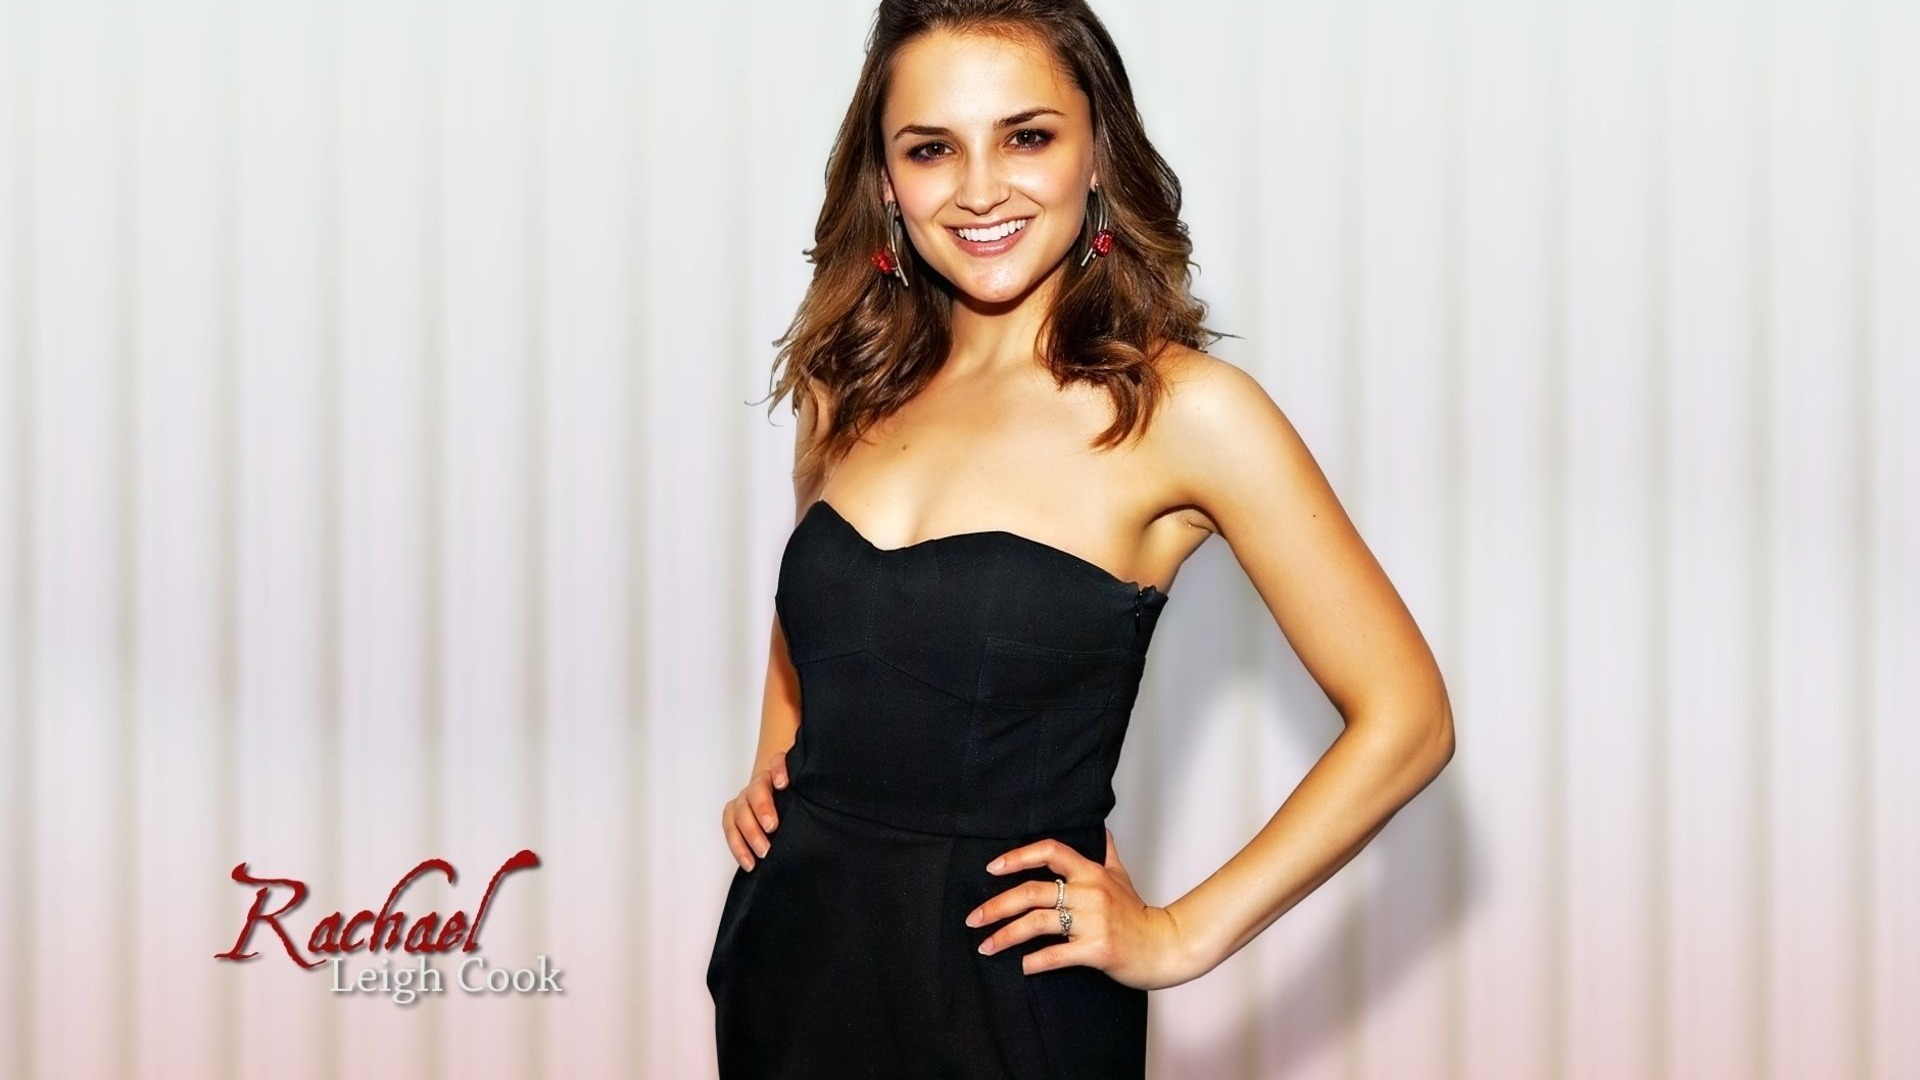 Rachael Leigh Cook #015 - 1920x1080 Wallpapers Pictures Photos Images